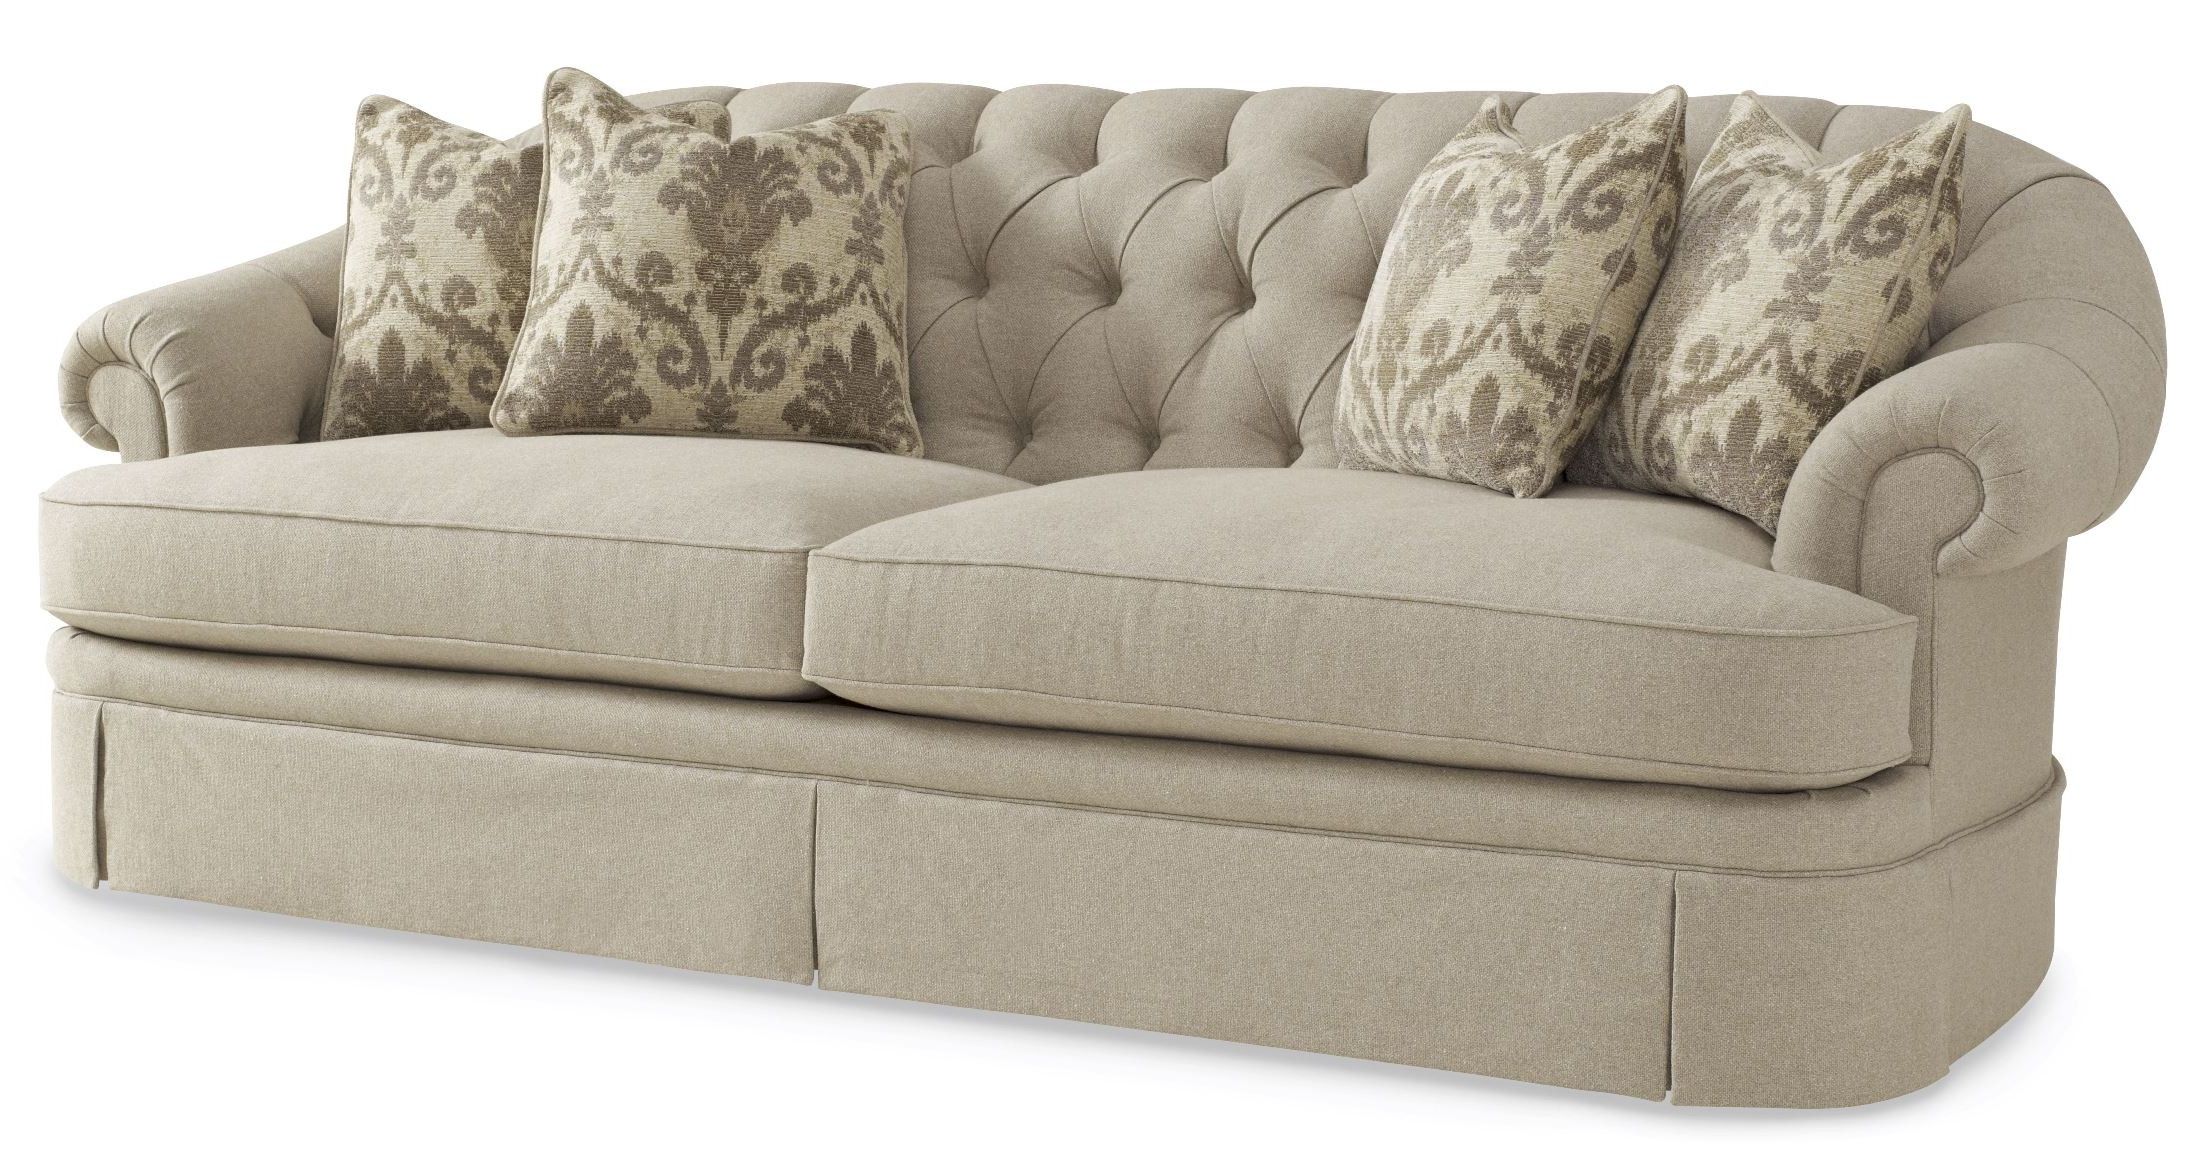 Favorite Tufted Upholstered Sofas With Regard To Collection One Upholstered Oxford Tufted Skirted Sofa From Art (517521 (Photo 8 of 15)